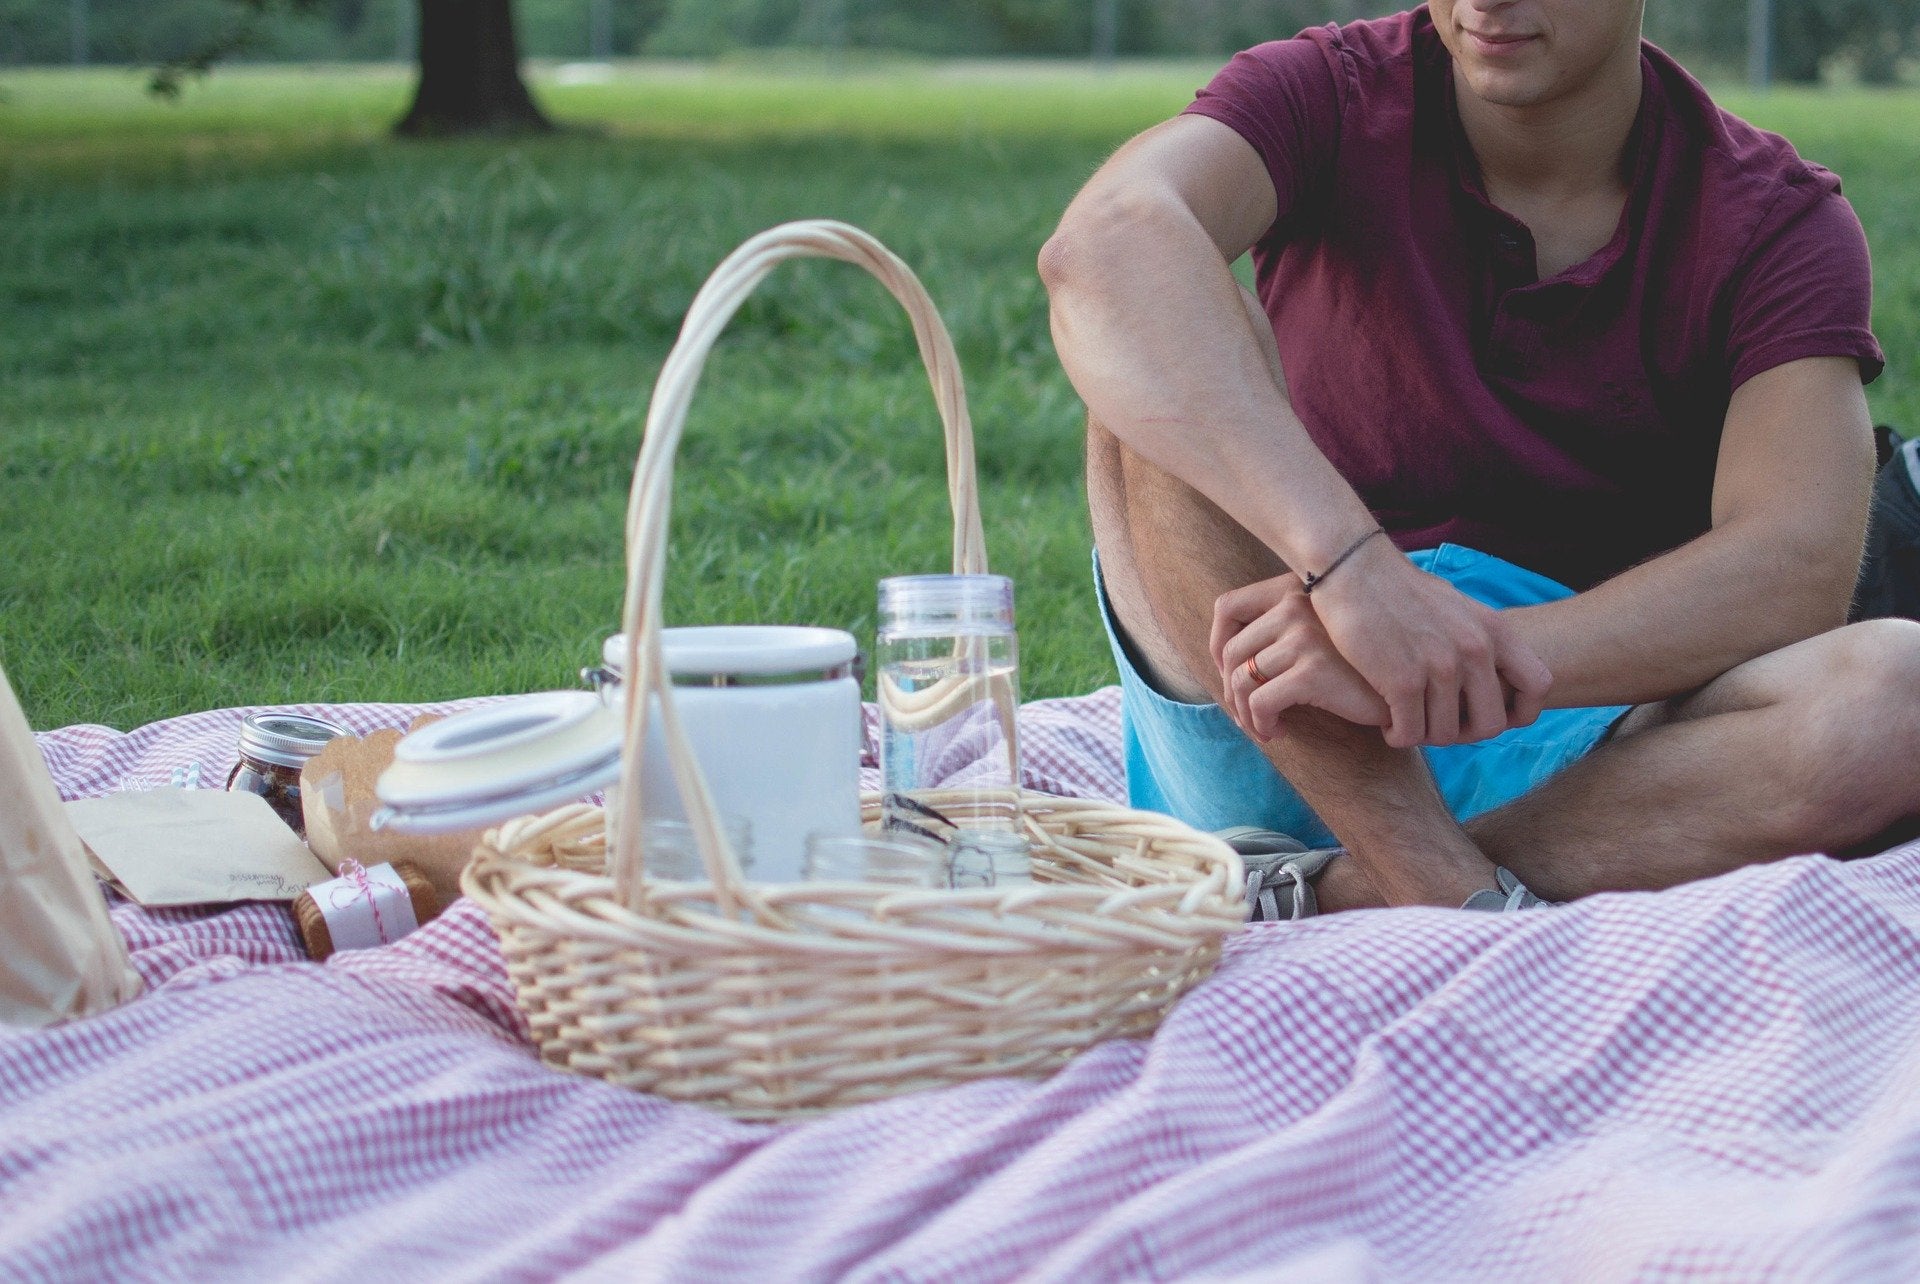 There are so many lovely spots out there to enjoy a picnic...